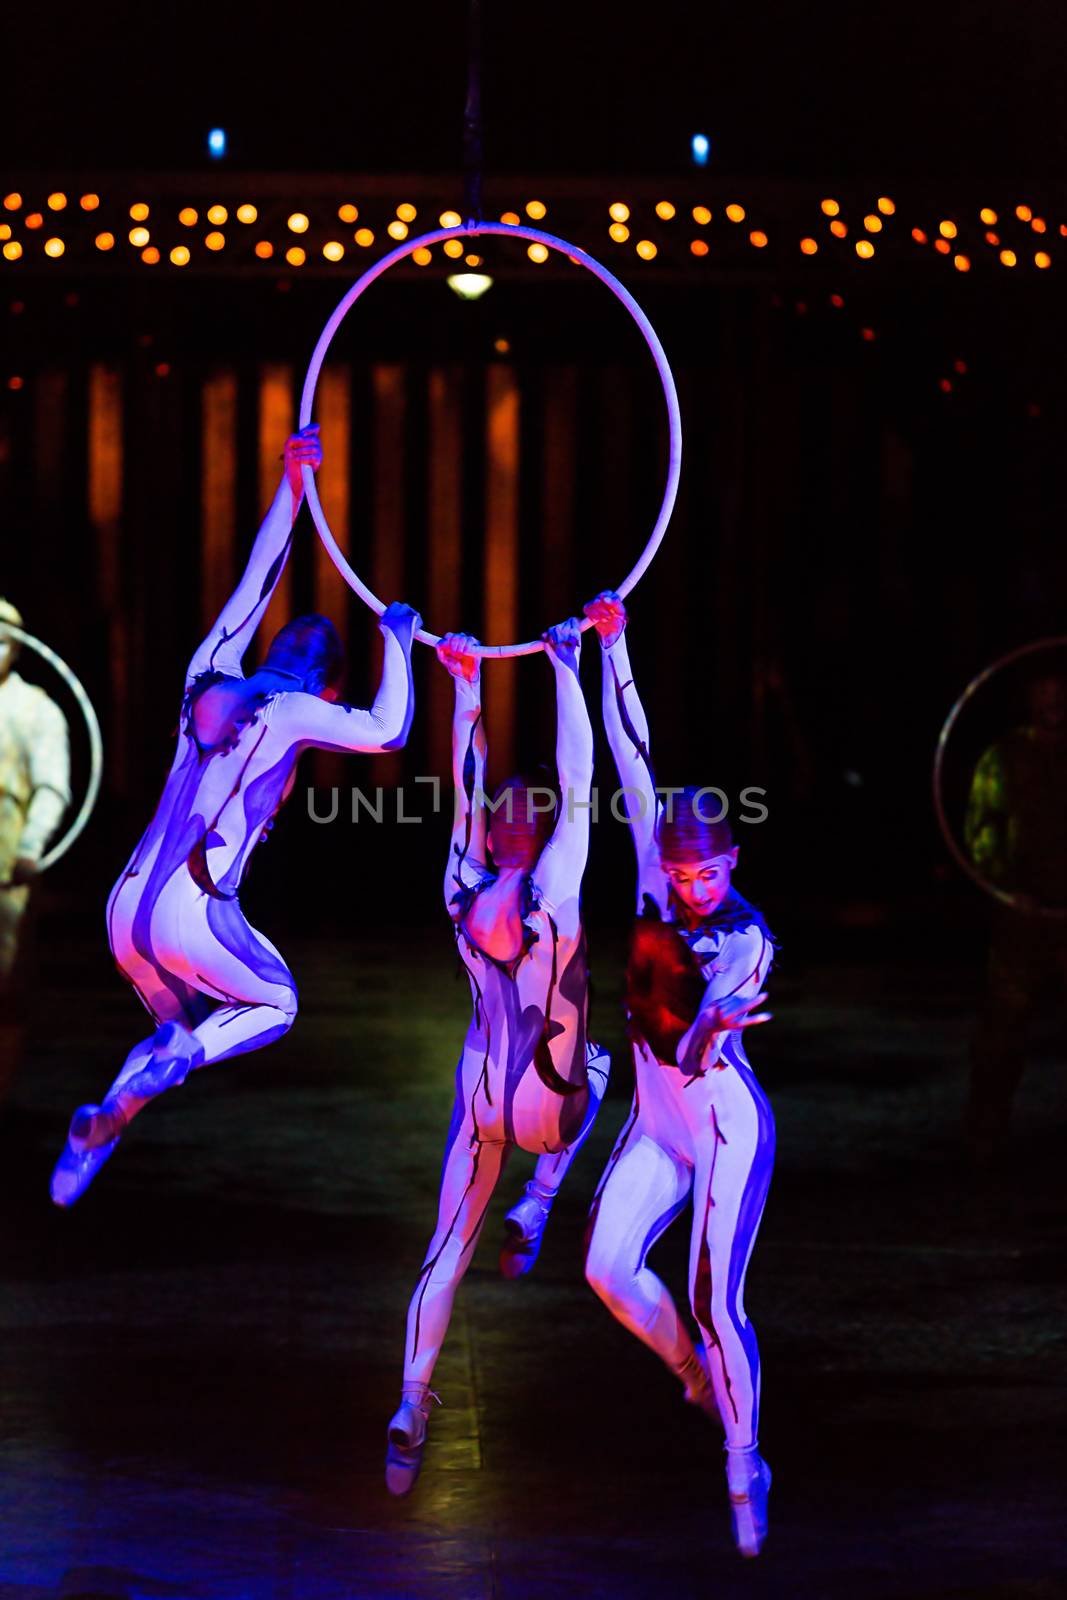 THESSALONIKI, GREECE - OCTOBER, 1, 2014: Performers skipping Rope at Cirque du Soleil's show 'Quidam'